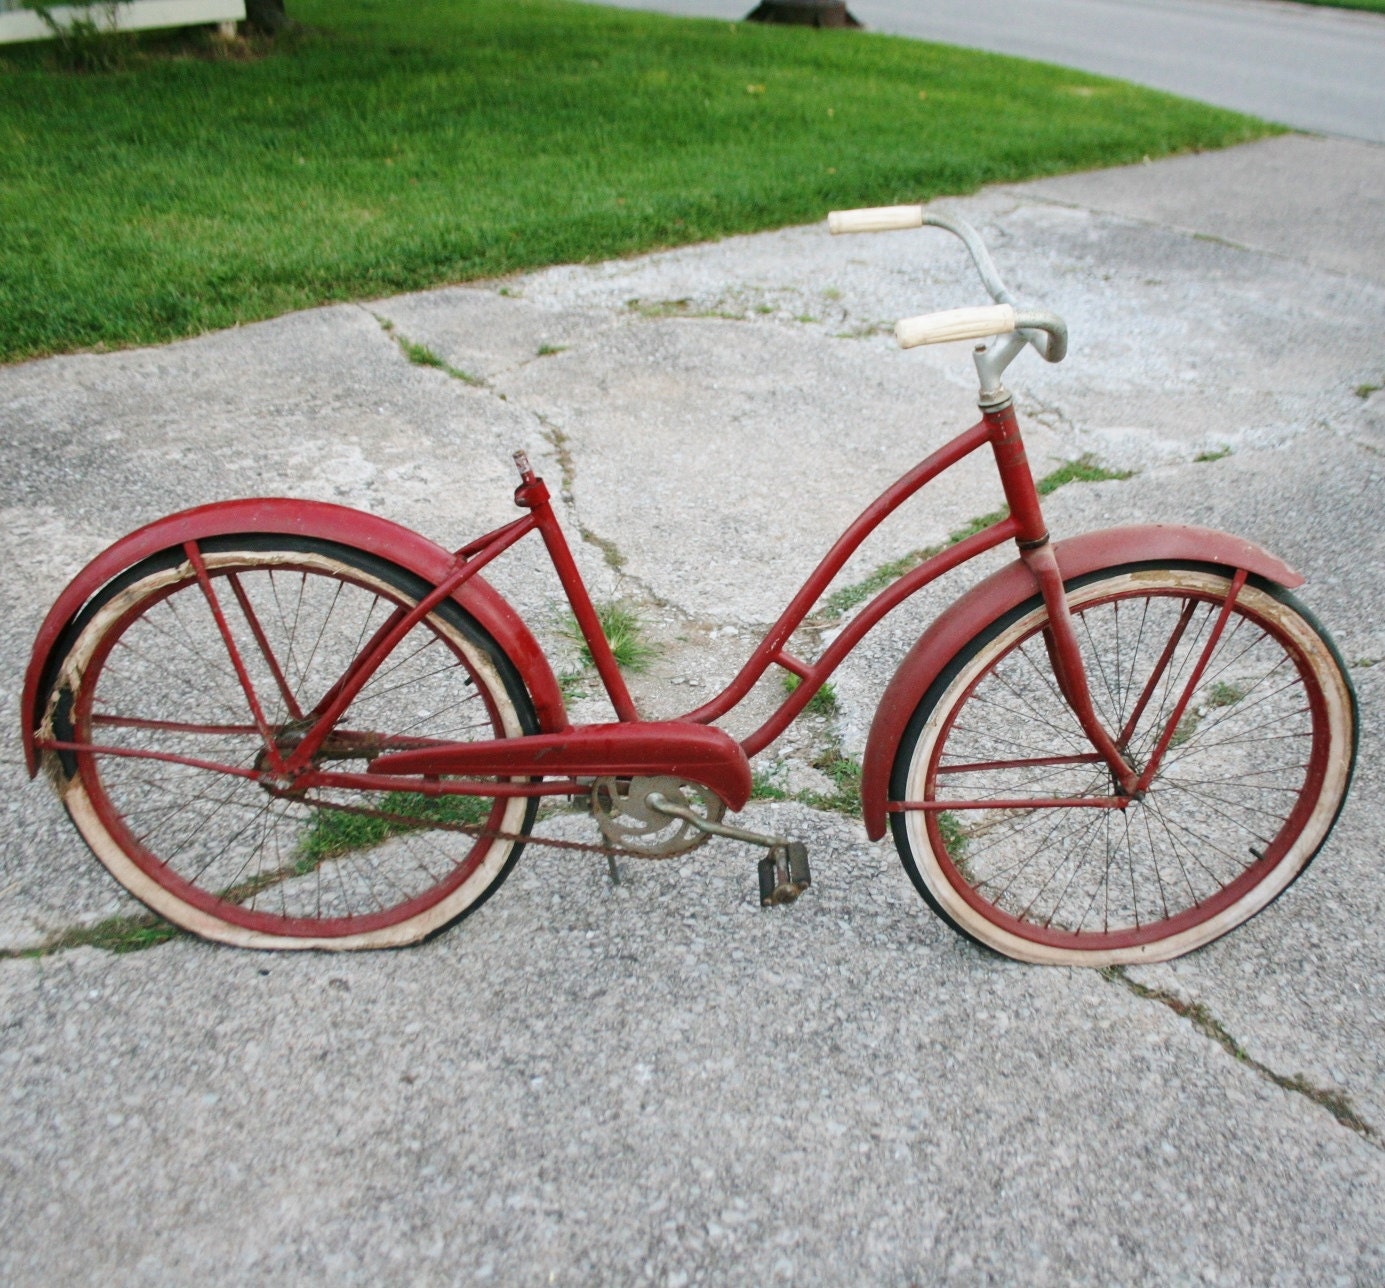 Antique Rustic Red JC Higgins Women's Bicycle - Skiptooth - sariloaf